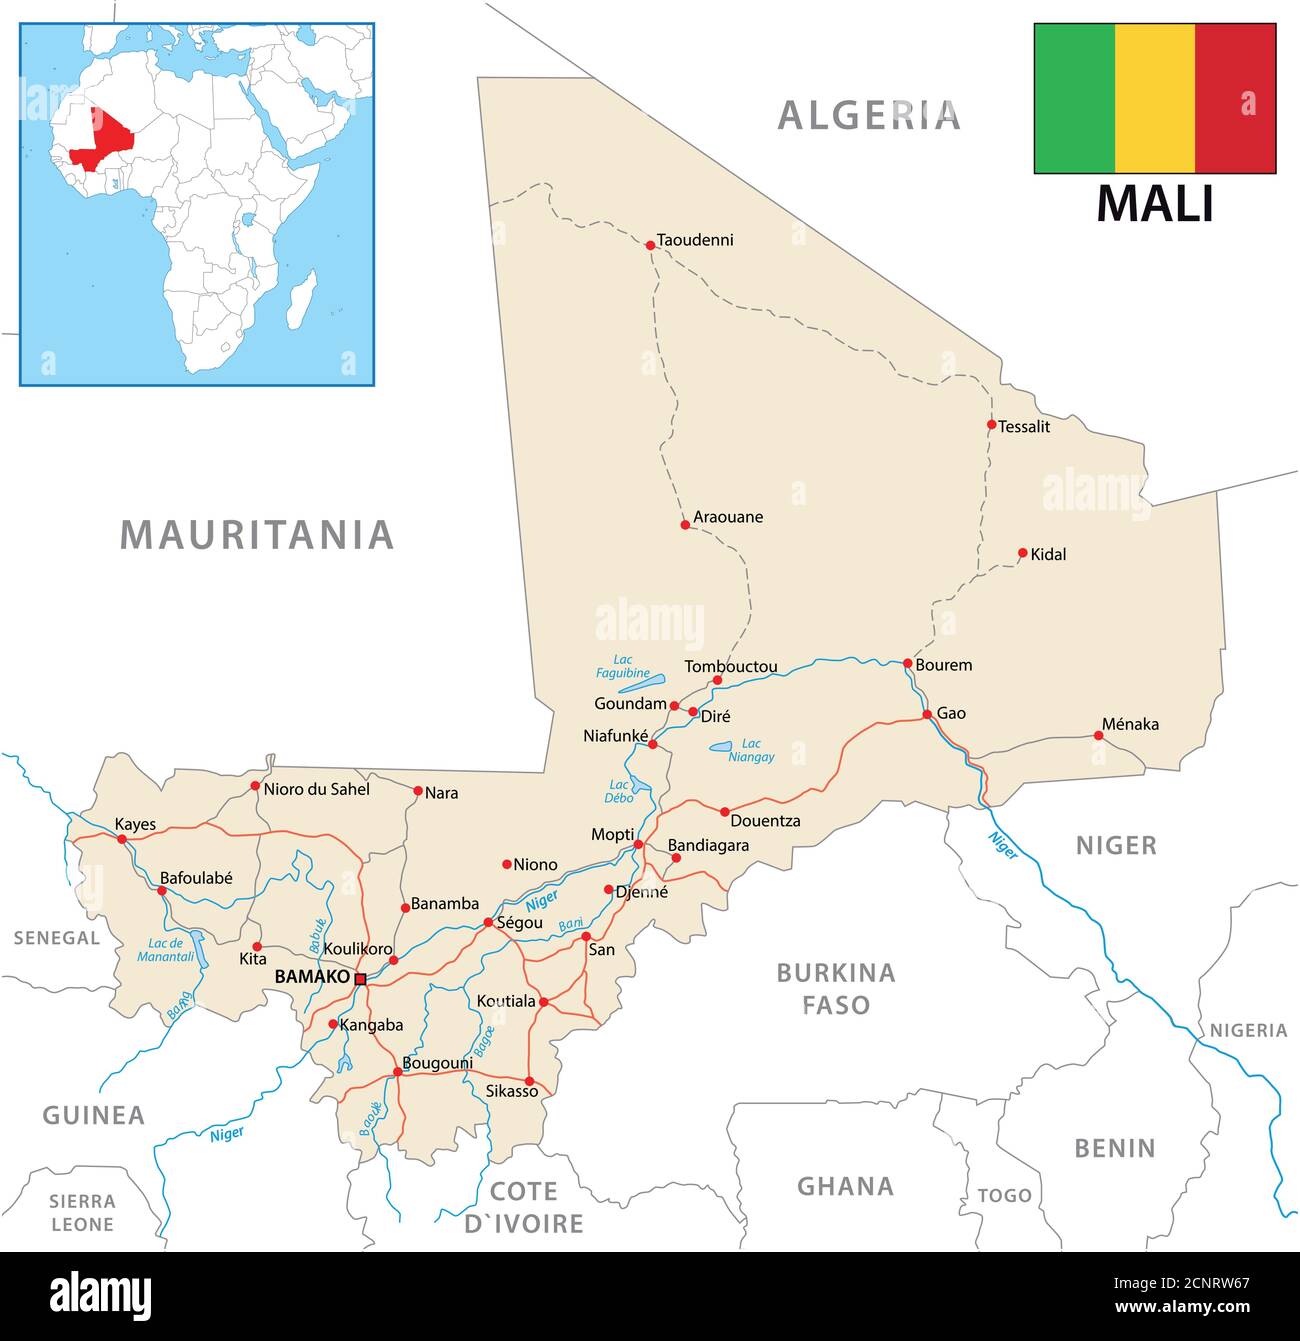 vector road map of the Republic of Mali with flag Stock Vector